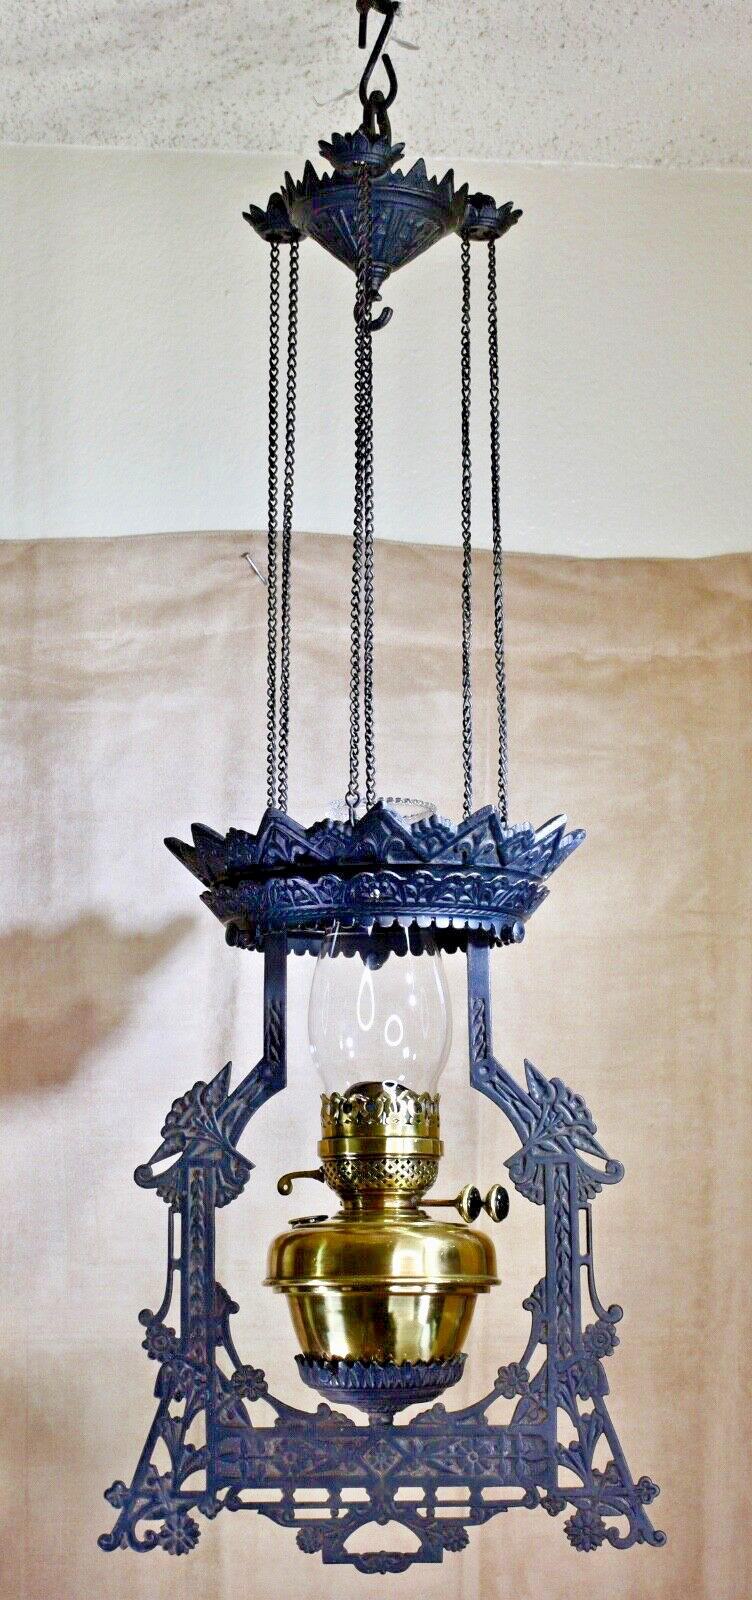 ANTIQUE Victorian Bradley & Hubbard Cast Iron Pull Down Hanging Oil Lamp 1877